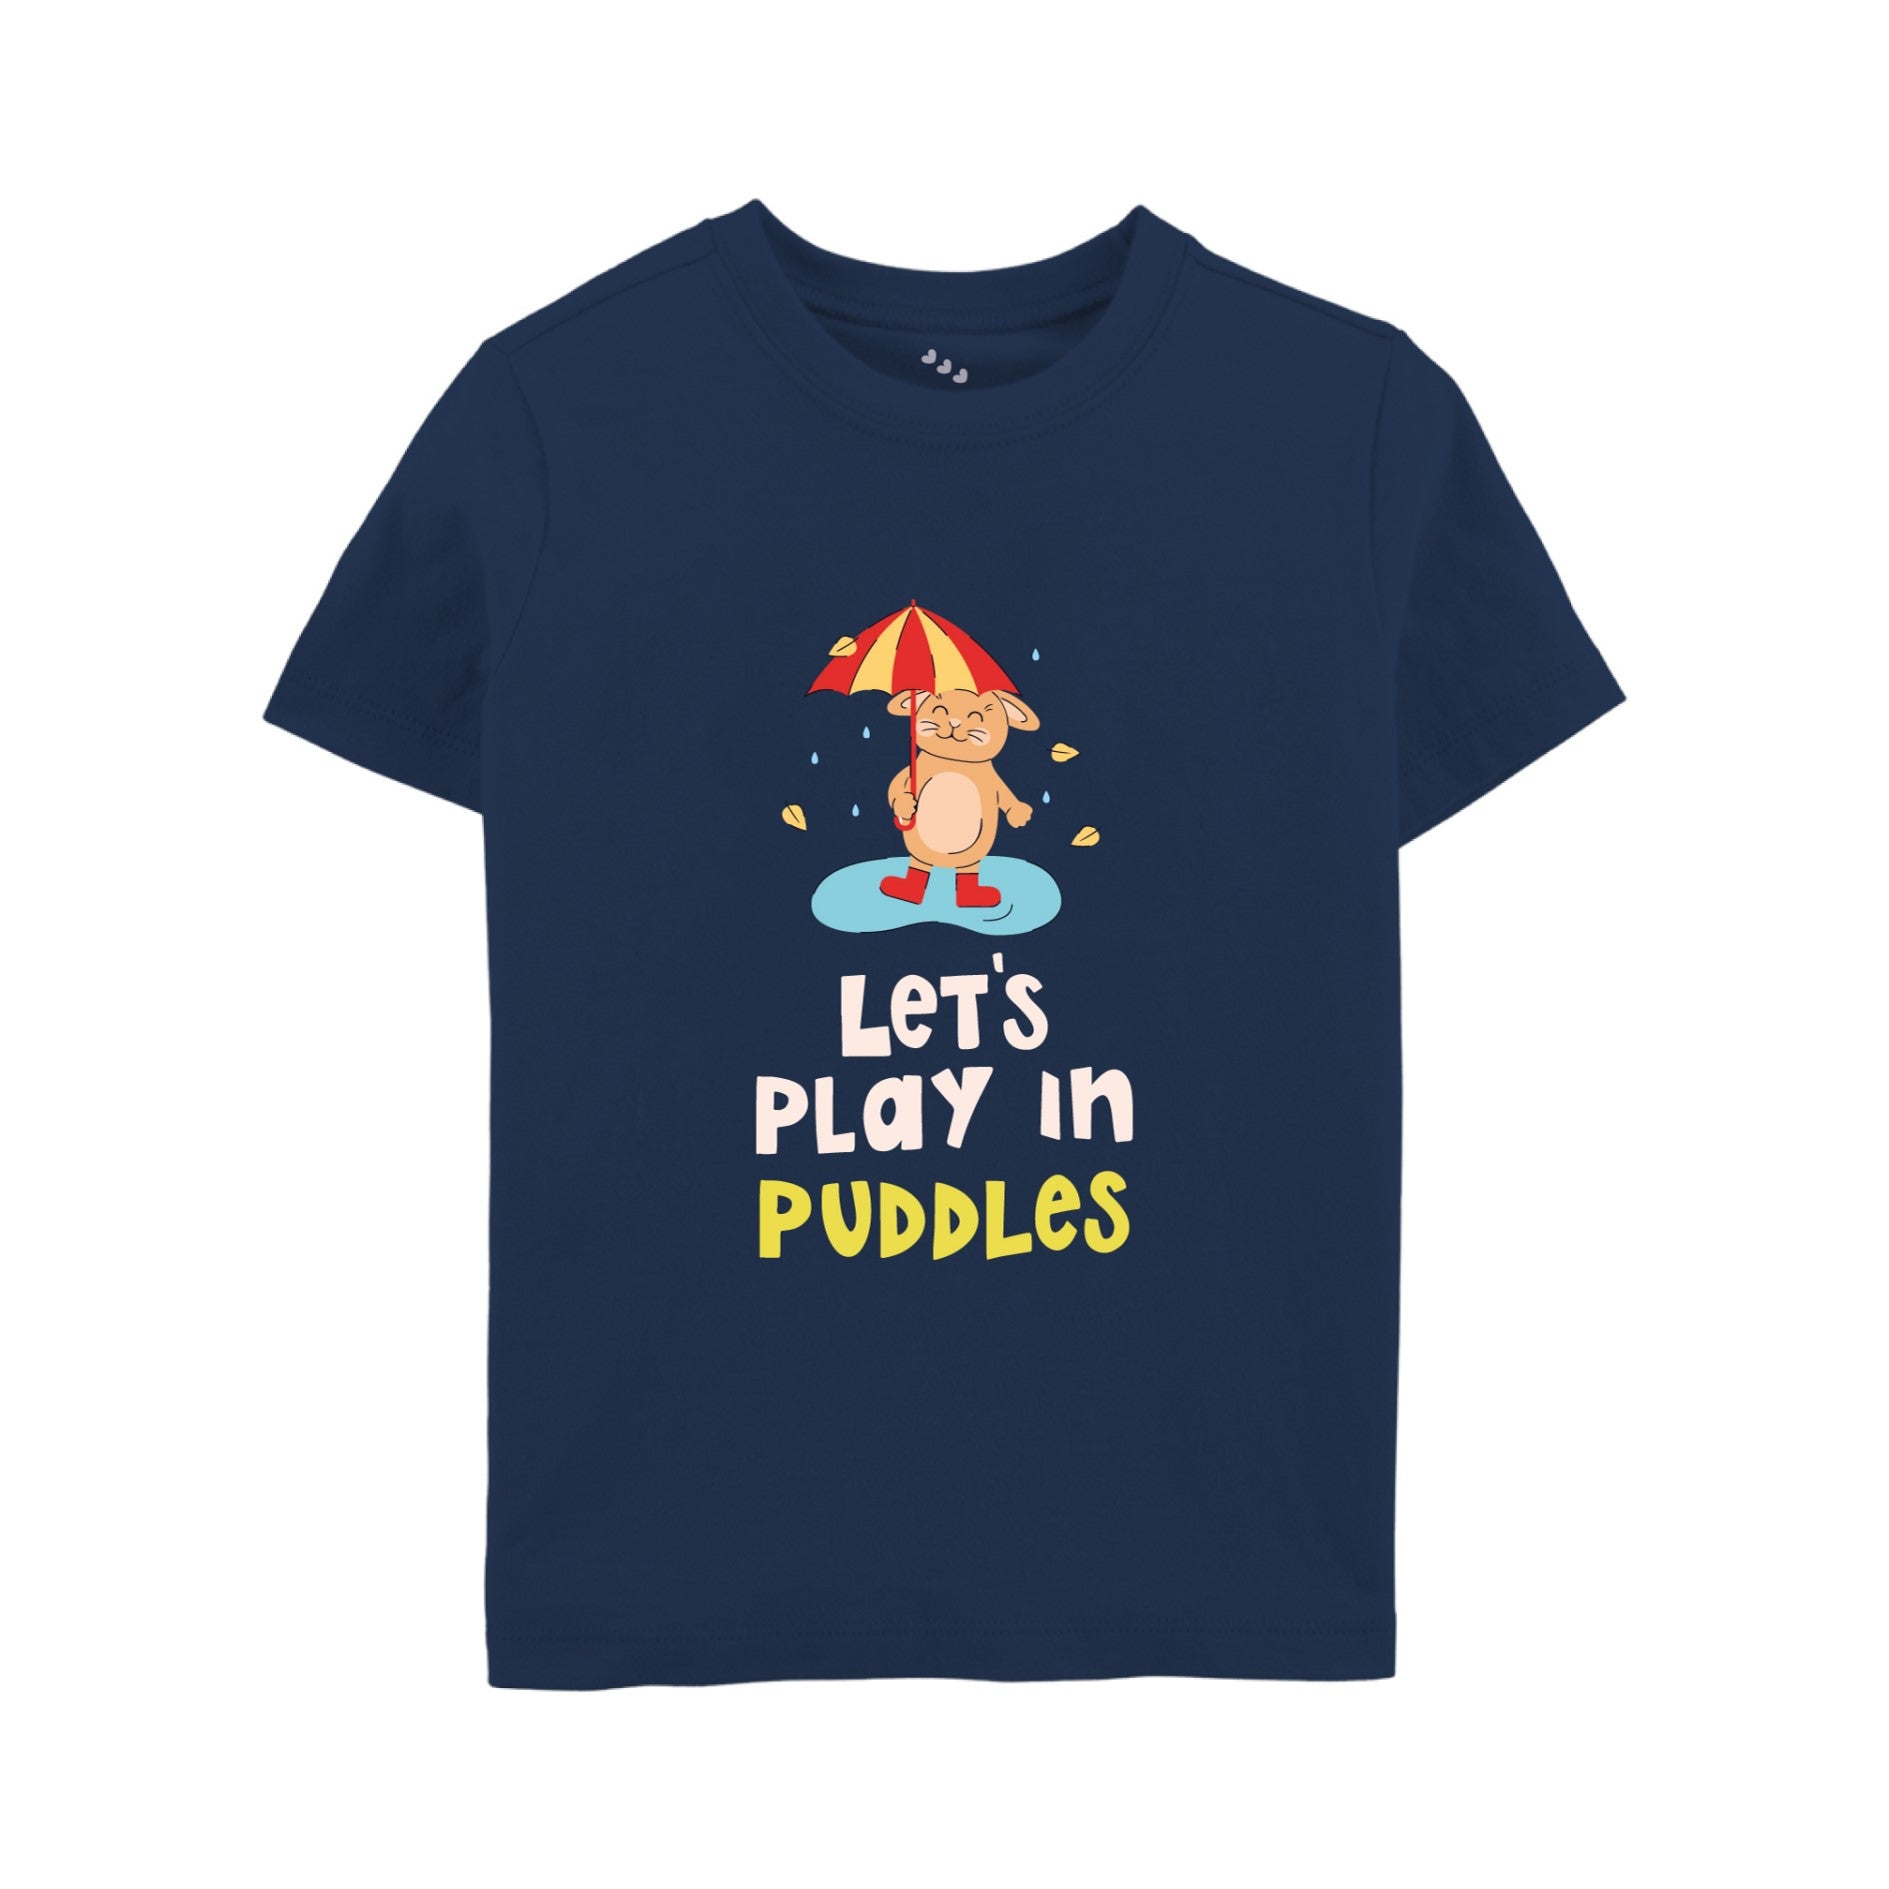 Let's Play In Puddles - Navy Blue